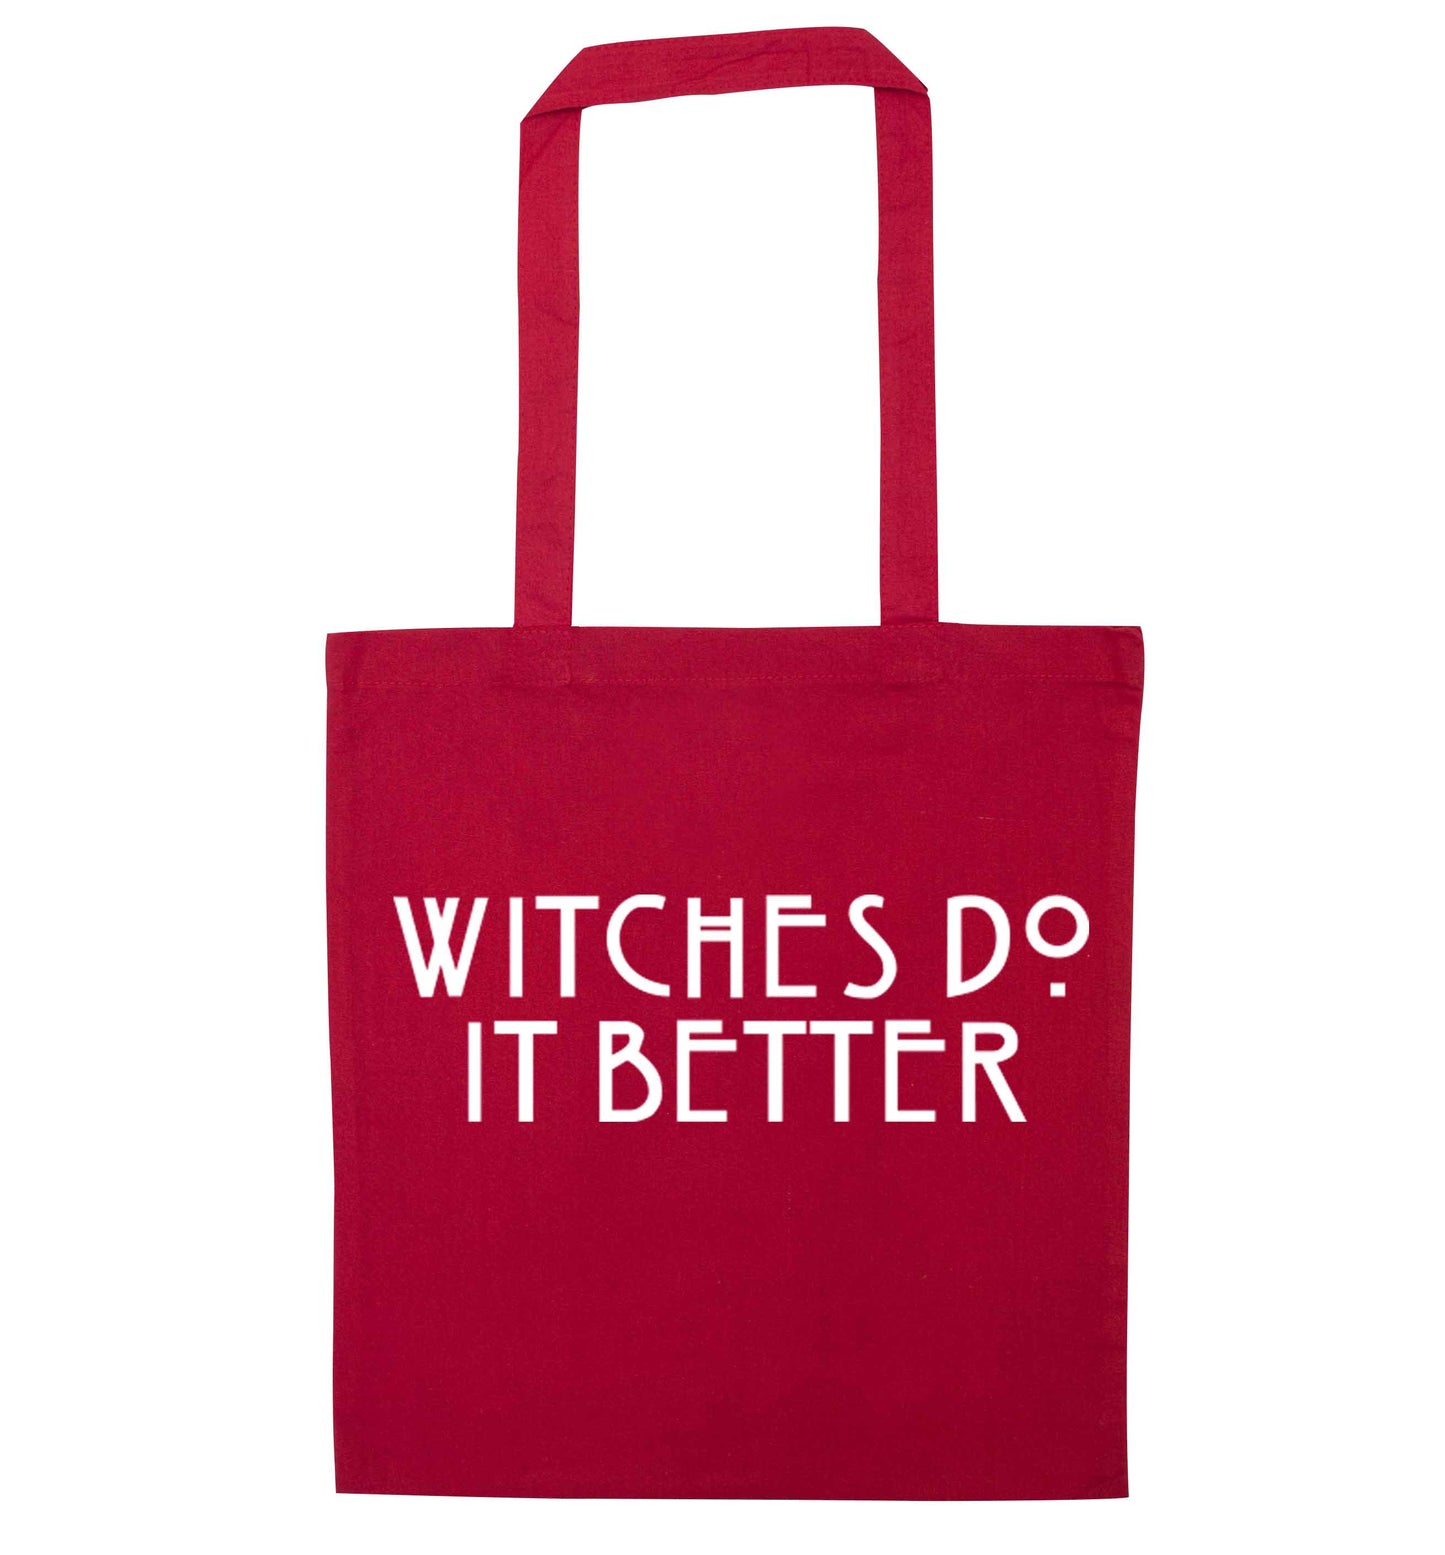 Witches do it better red tote bag